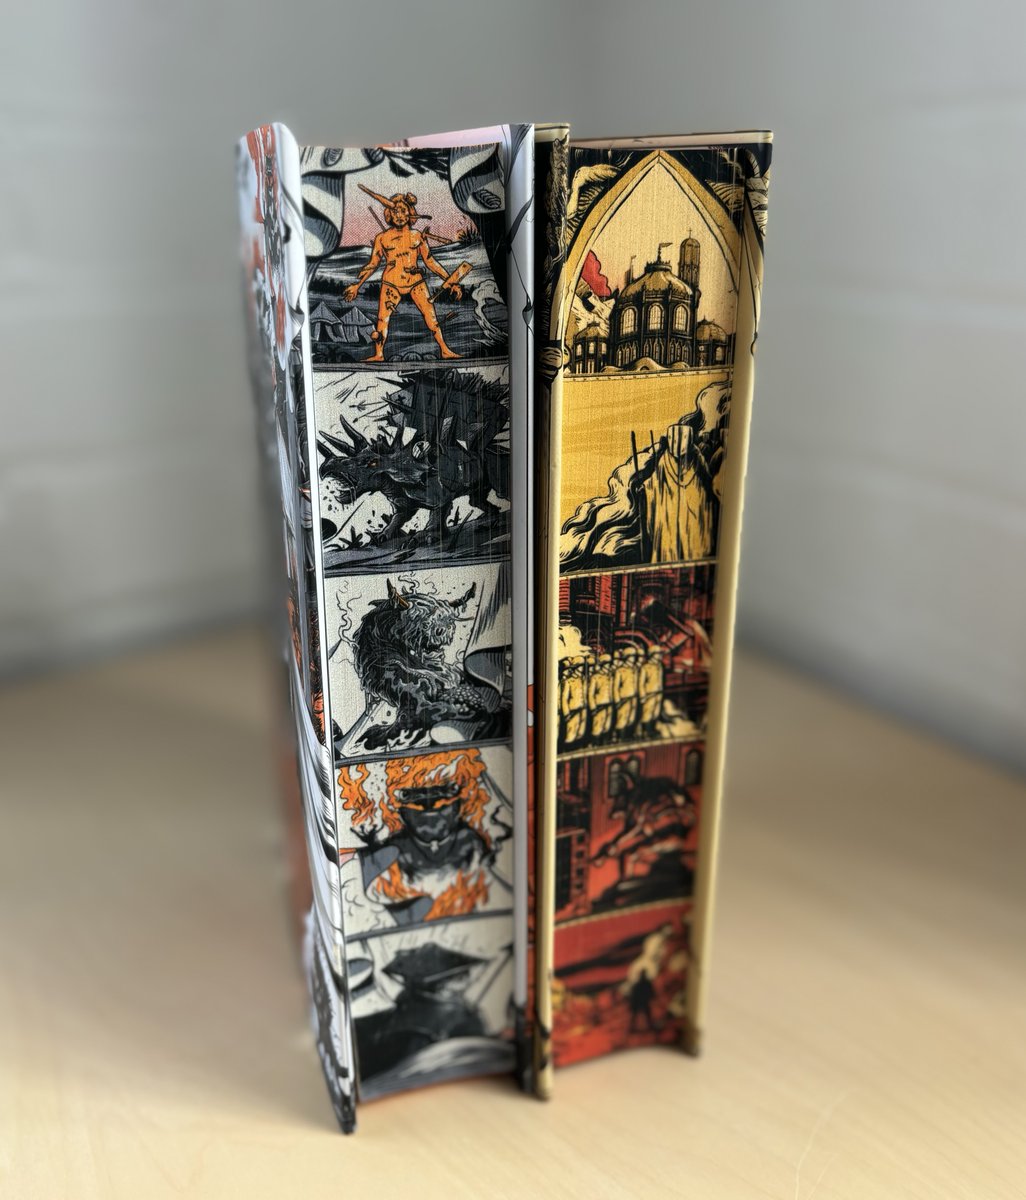 Did somebody say #SprayedEdgeSaturday...

How exquisite are these wonderful editions of #CityOfLastChances and #HouseOfOpenWounds by Adrian Tchaikovsky (@aptshadow)?